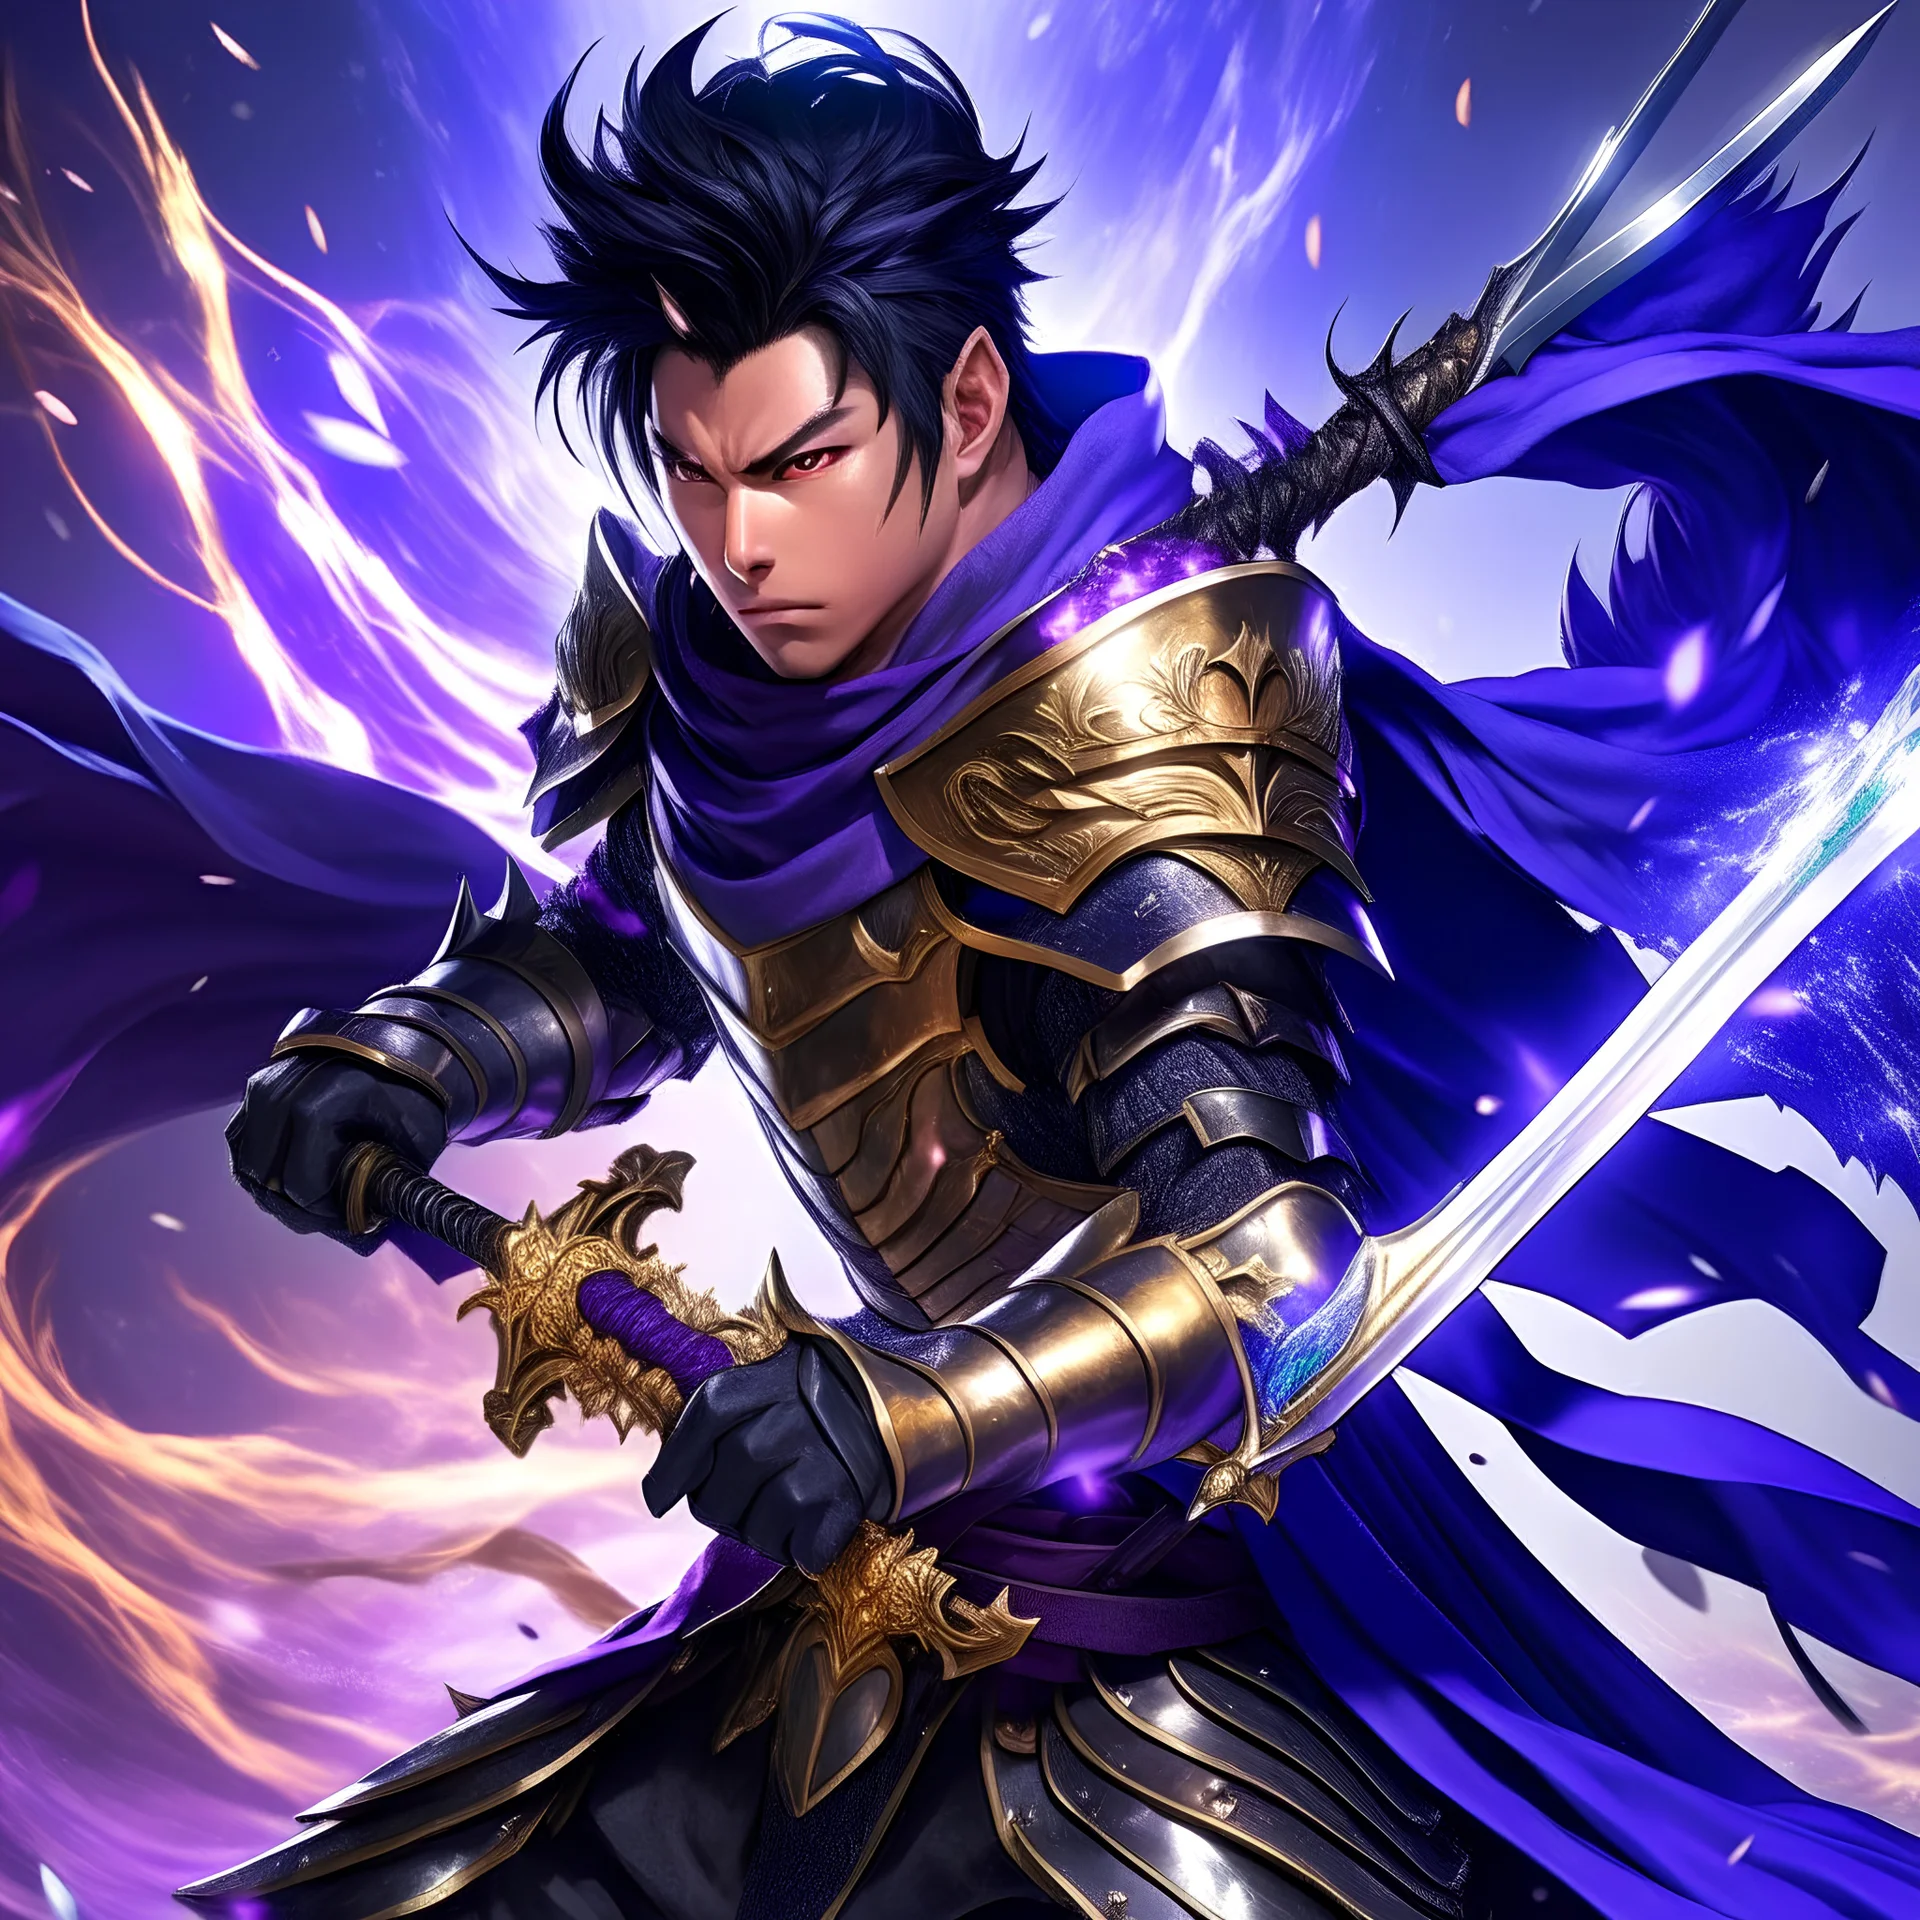 A man with spiky black hair is holding a purple sword and wearing a gold-colored suit of armor, including a cape. He appears to be in the middle of an action scene, possibly fighting or defending himself against an enemy. The image has a colorful background, adding to the dramatic atmosphere of the scene.